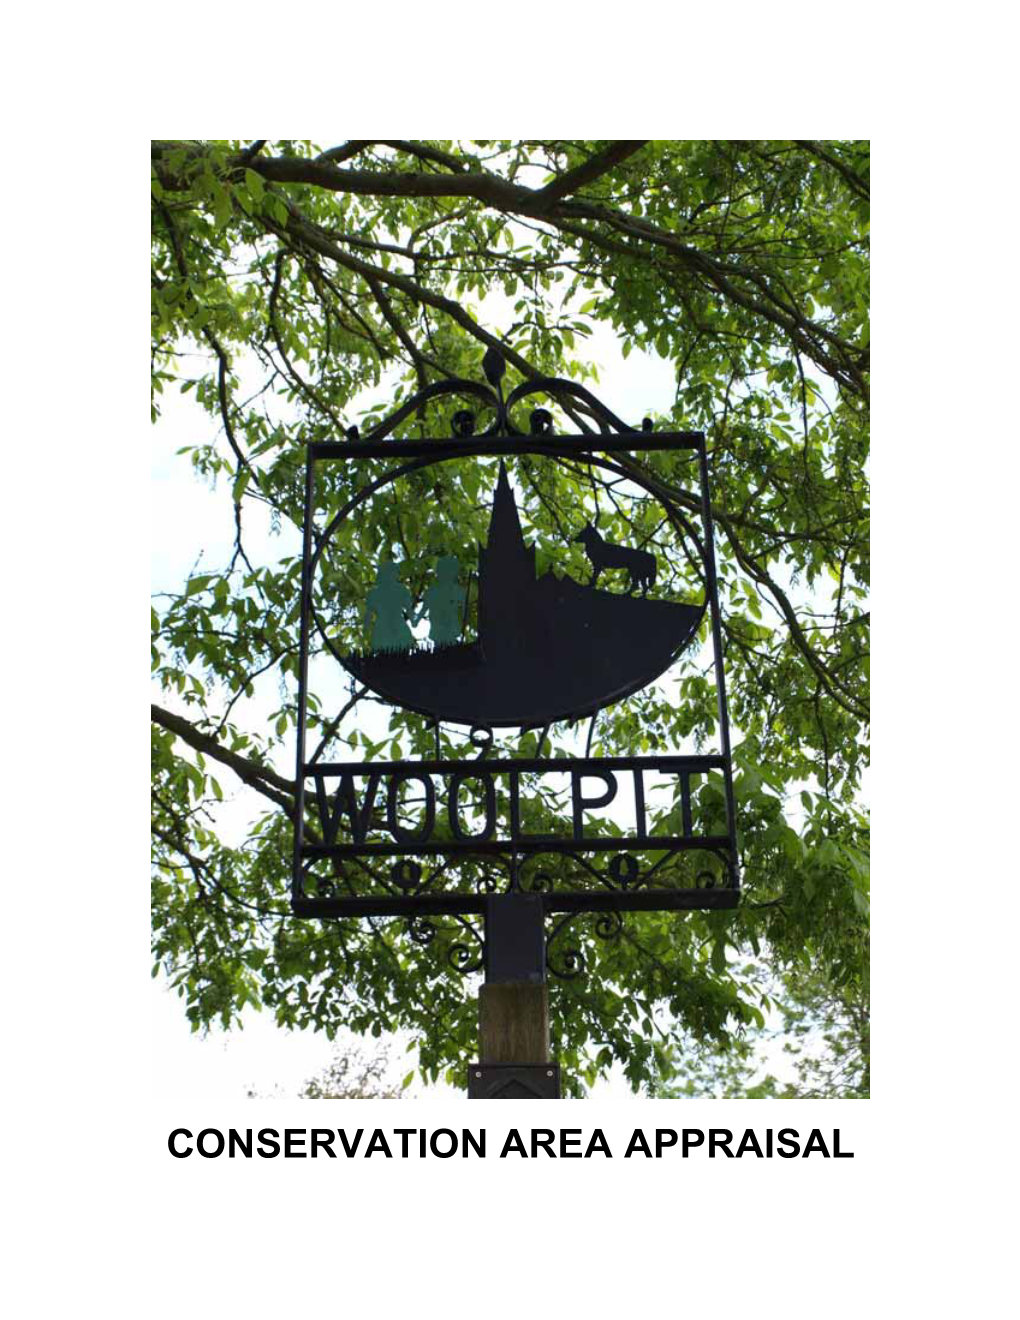 CONSERVATION AREA APPRAISAL © Crown Copyright All Rights Reserved M S D C Licence No 100017810 2010 INTRODUCTION